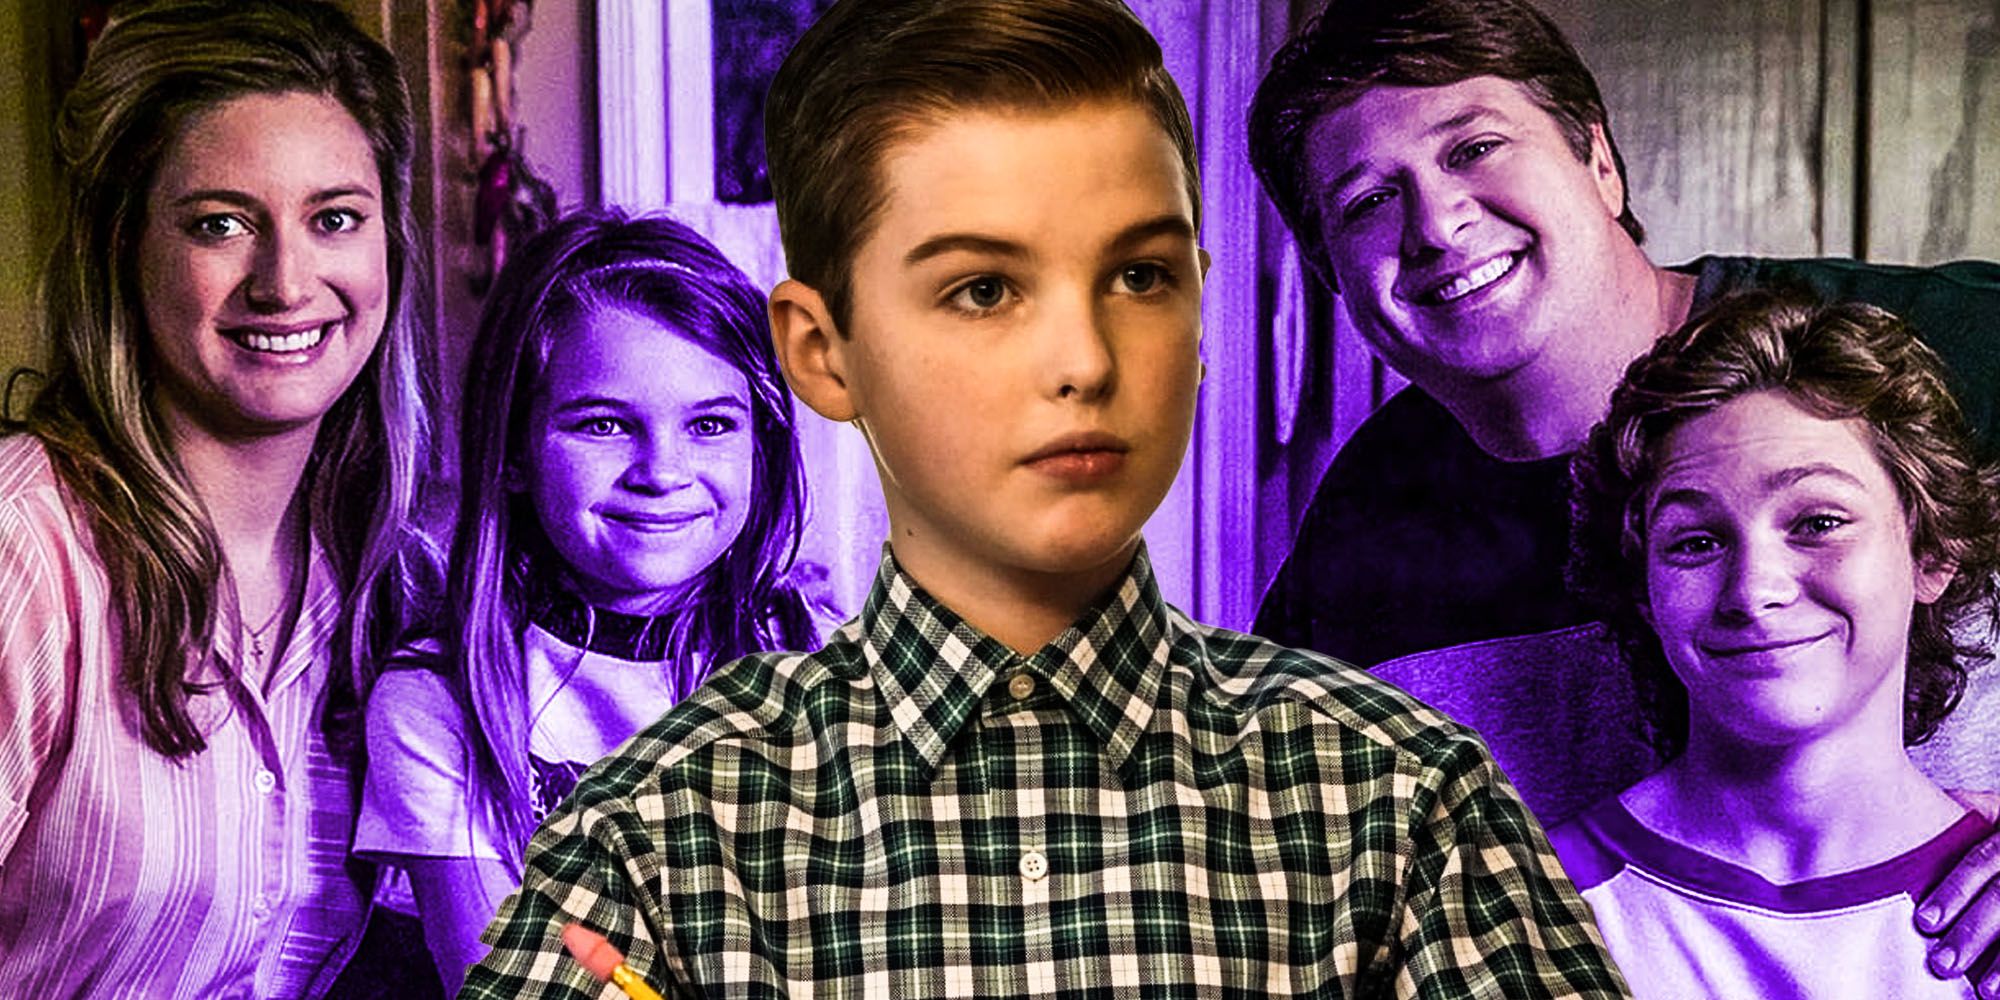 What To Expect From Young Sheldon Season 5